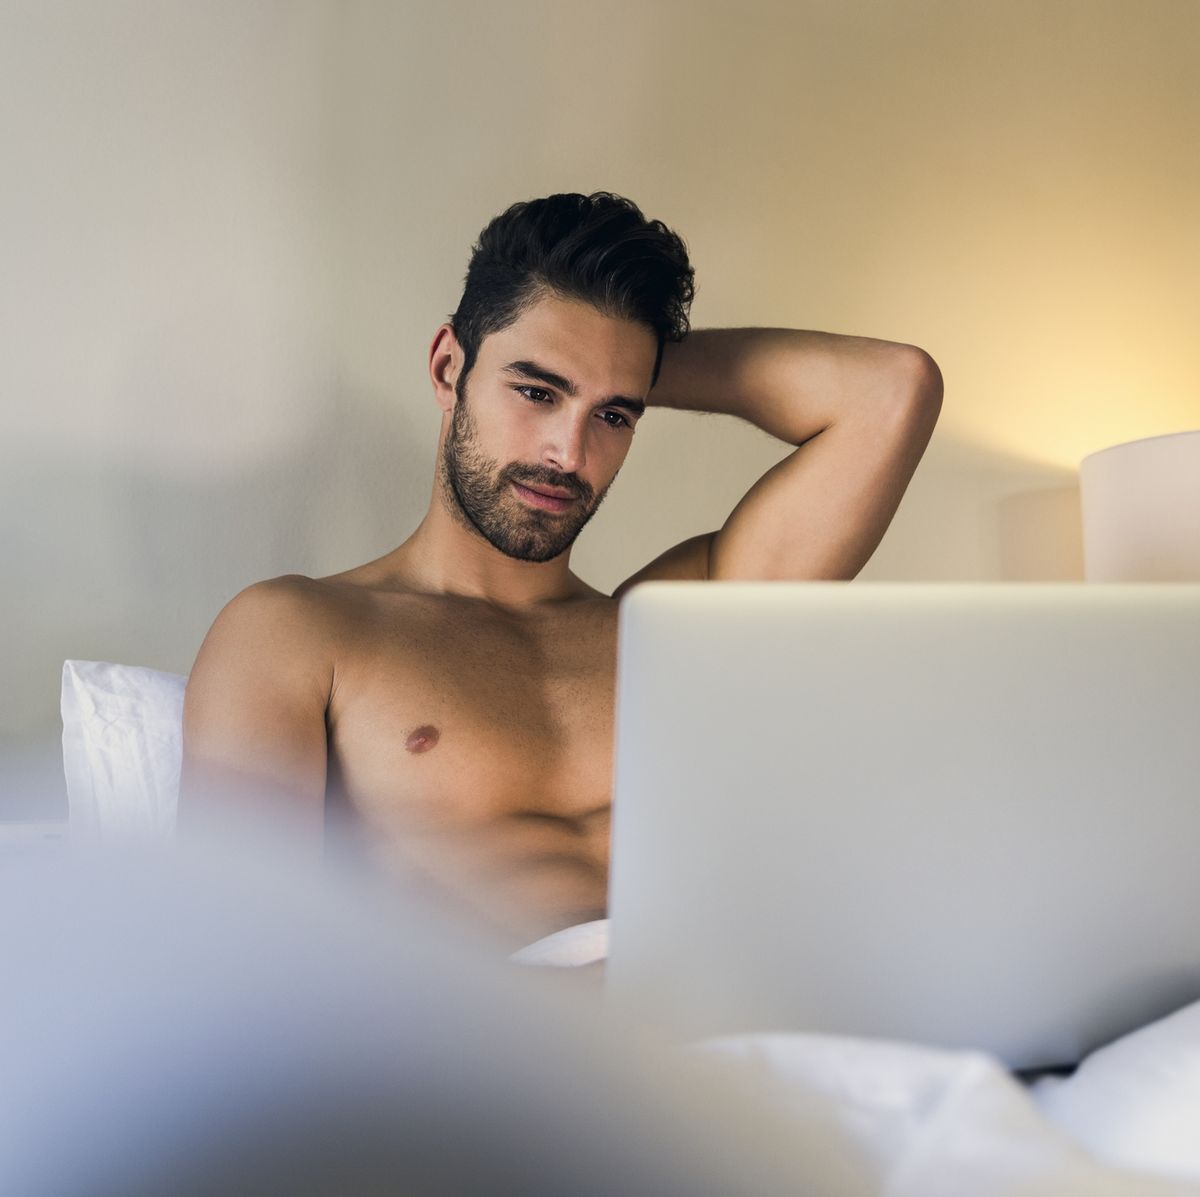 Xxx Six Pack Handsome Men 2019 - How to Browse Porn Sites Safely Without Getting Hacked